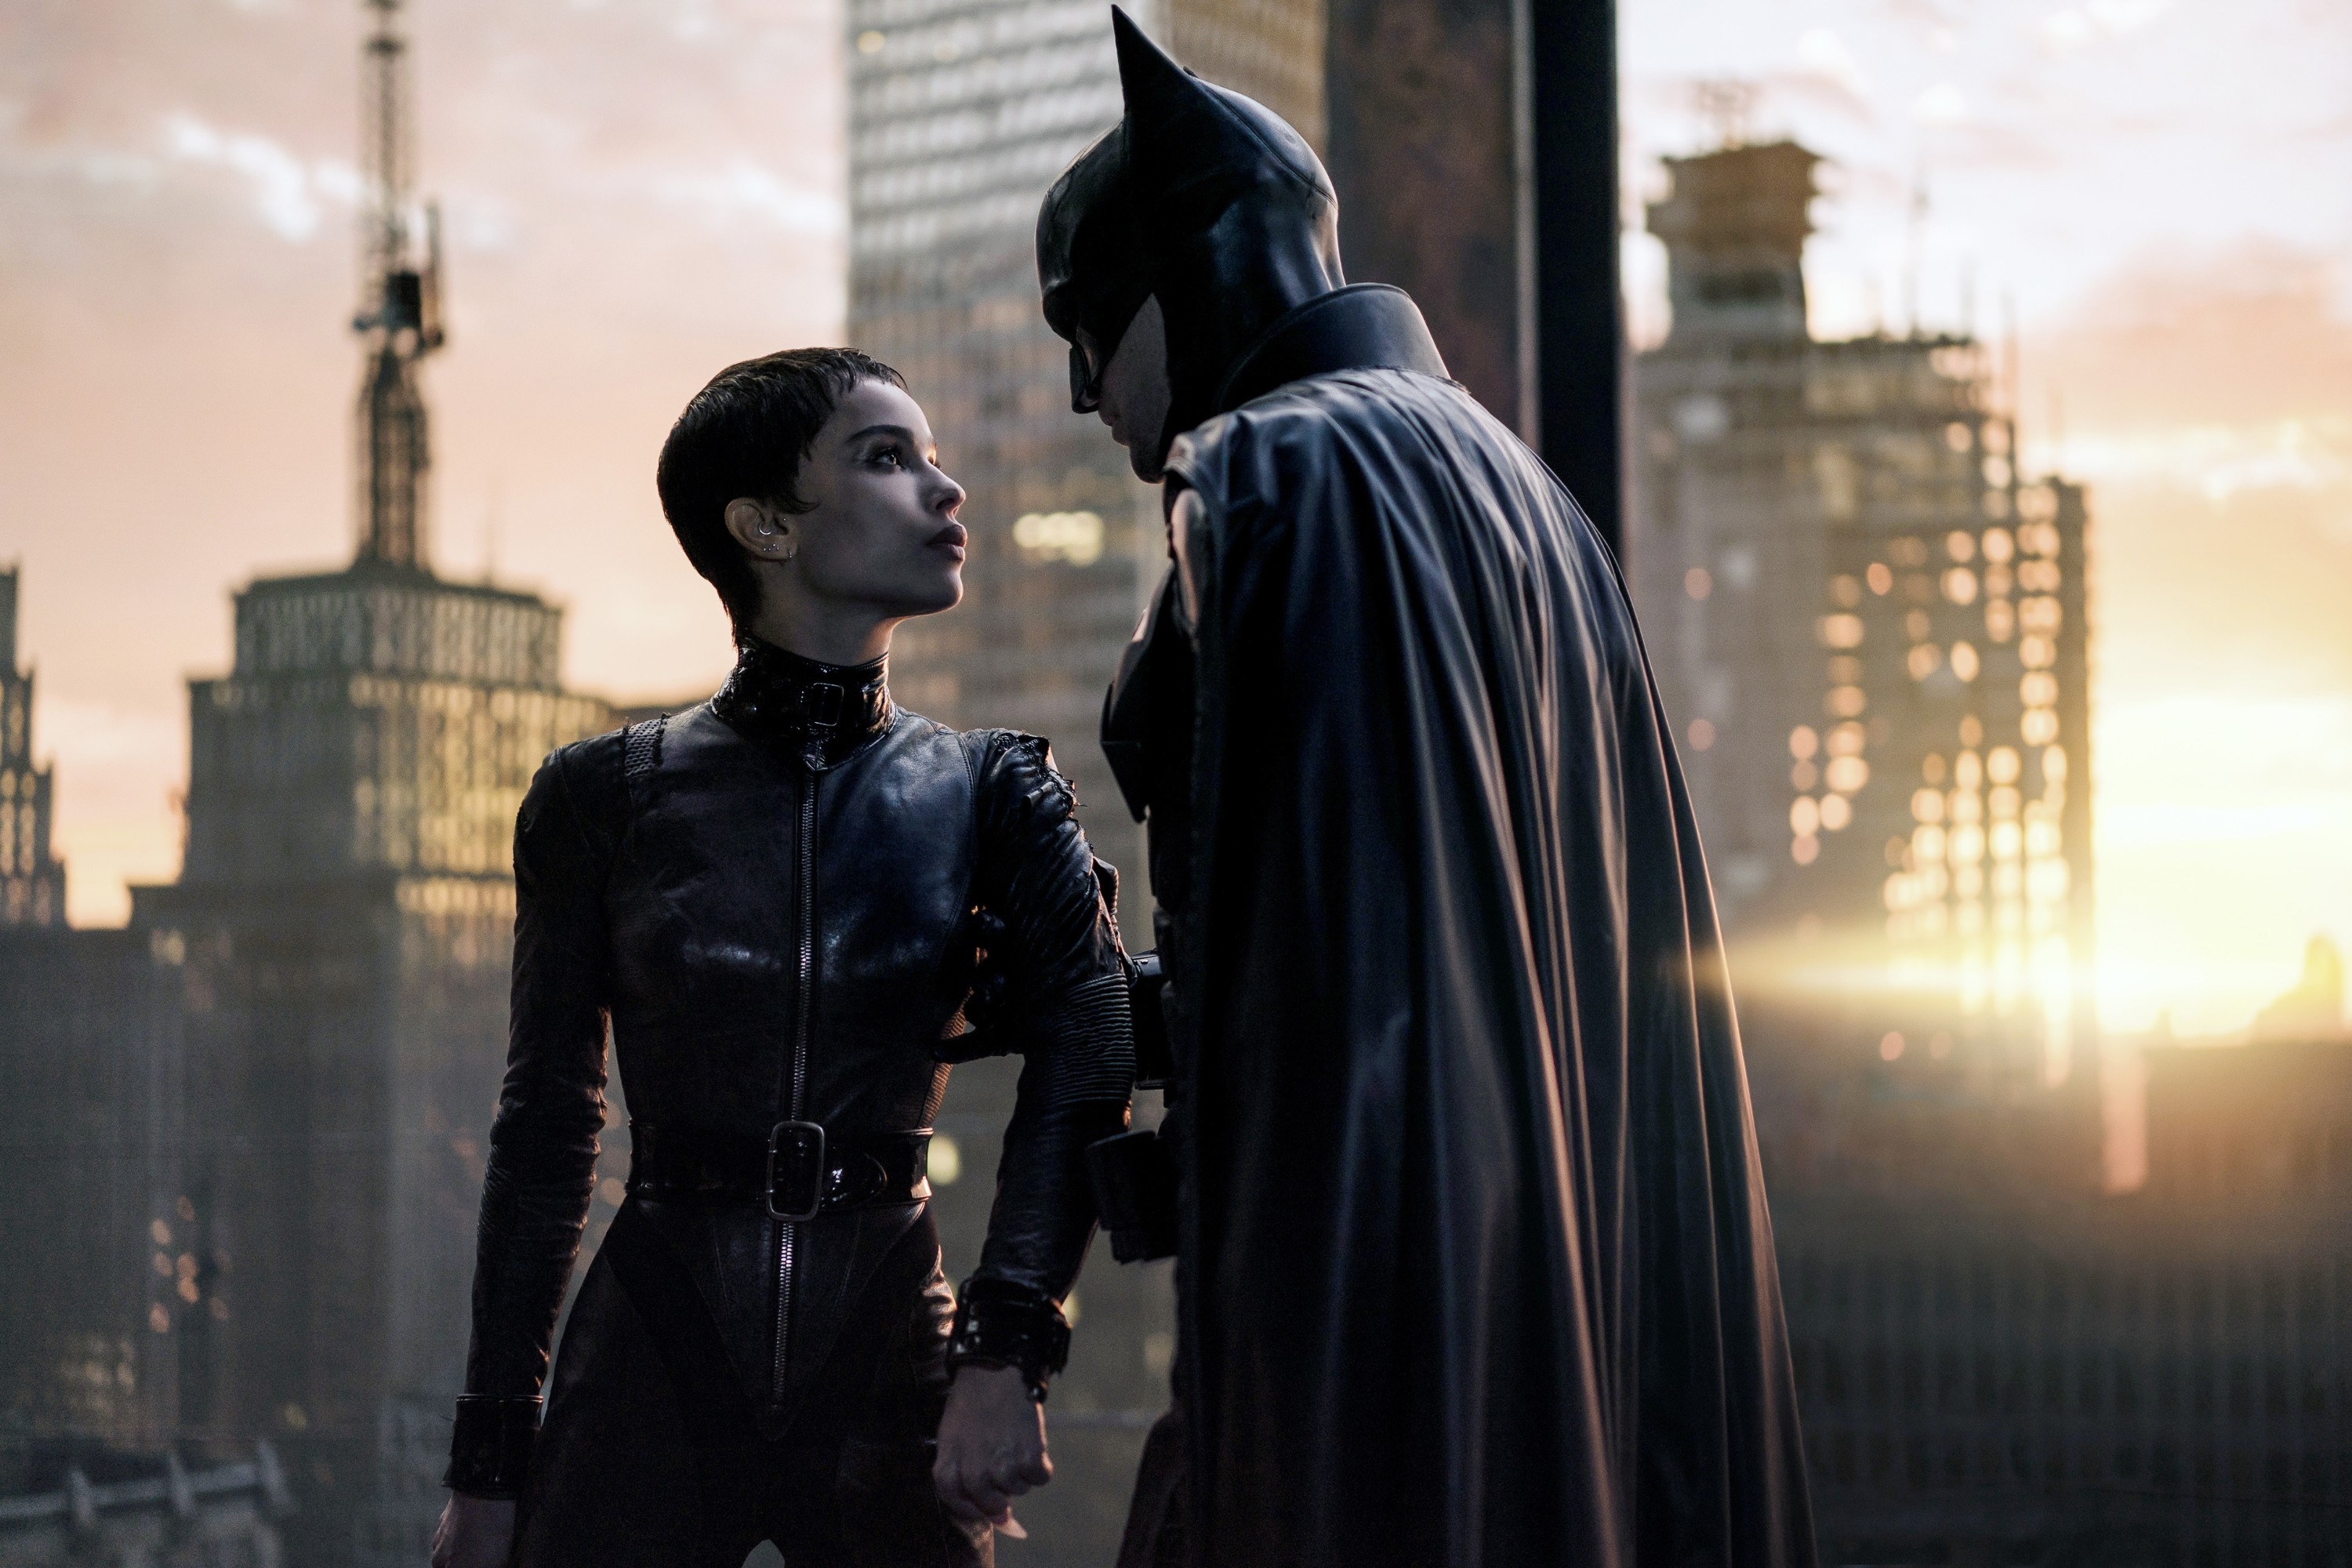 Catwoman and Batman looking at each other